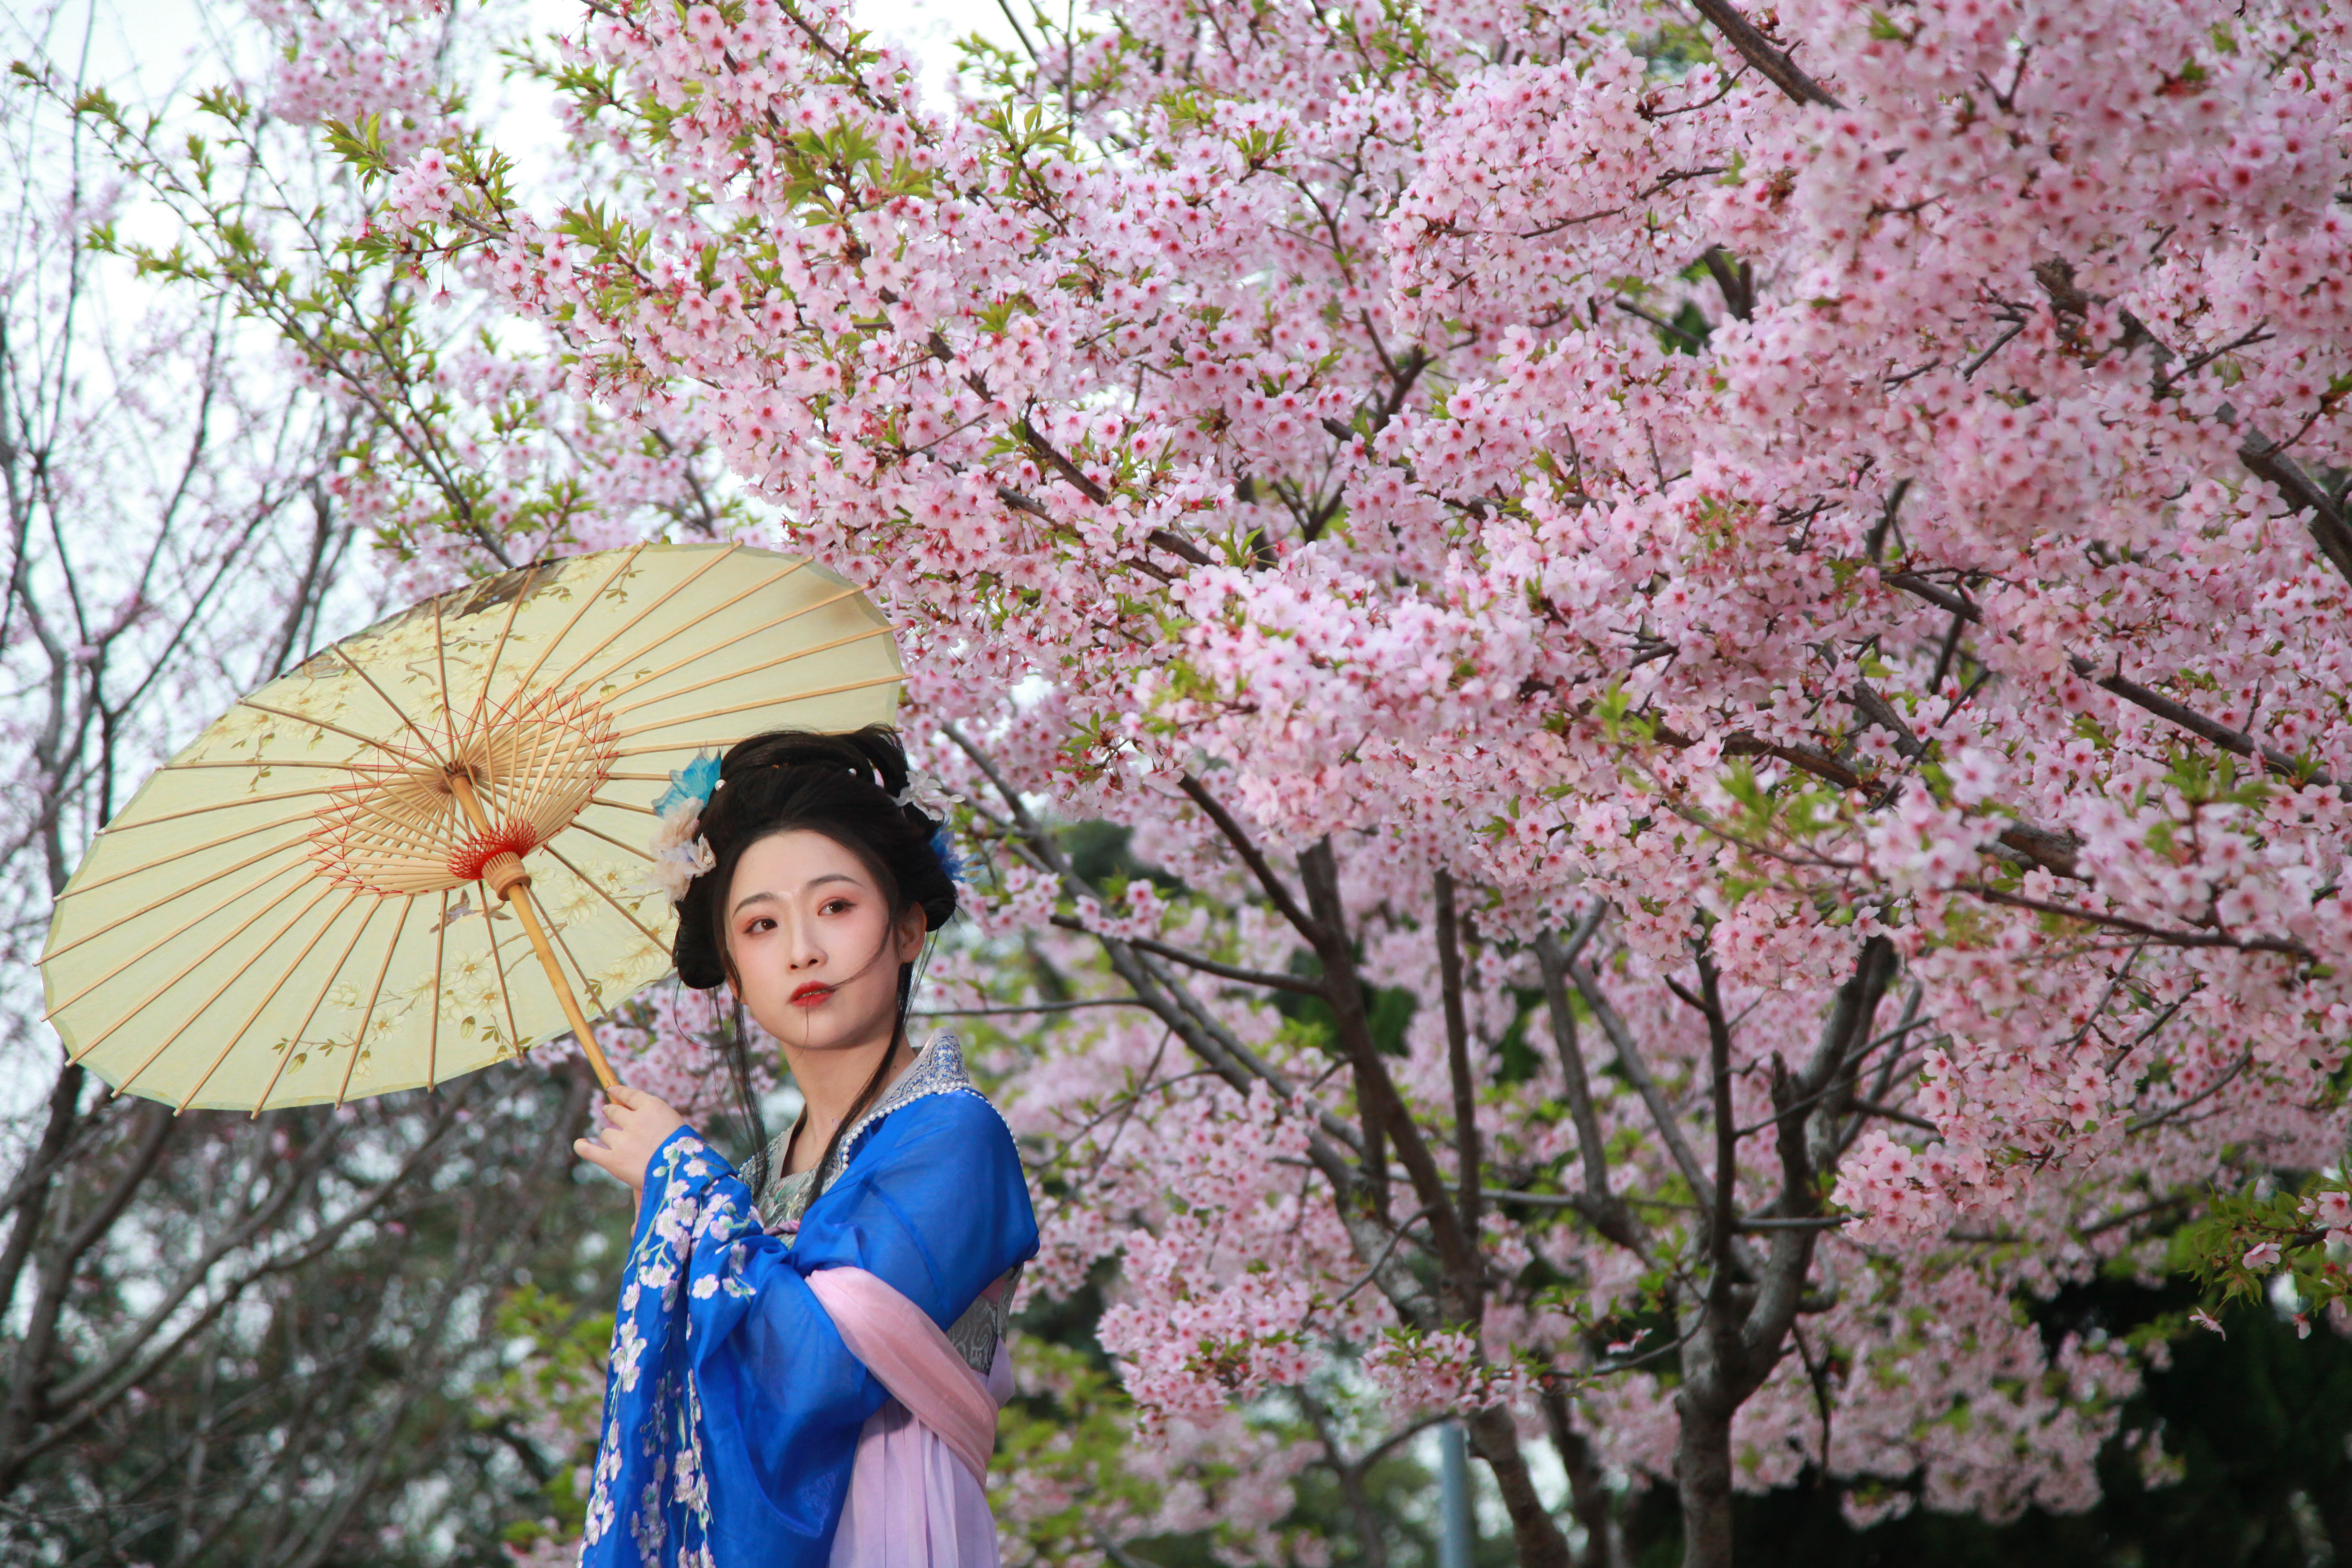 A visitor dressed in traditional Chinese clothing poses under blooming cherry blossom trees at Xuanwu Lake Park in Nanjing, east China's Jiangsu Province on March 17, 2024. /IC